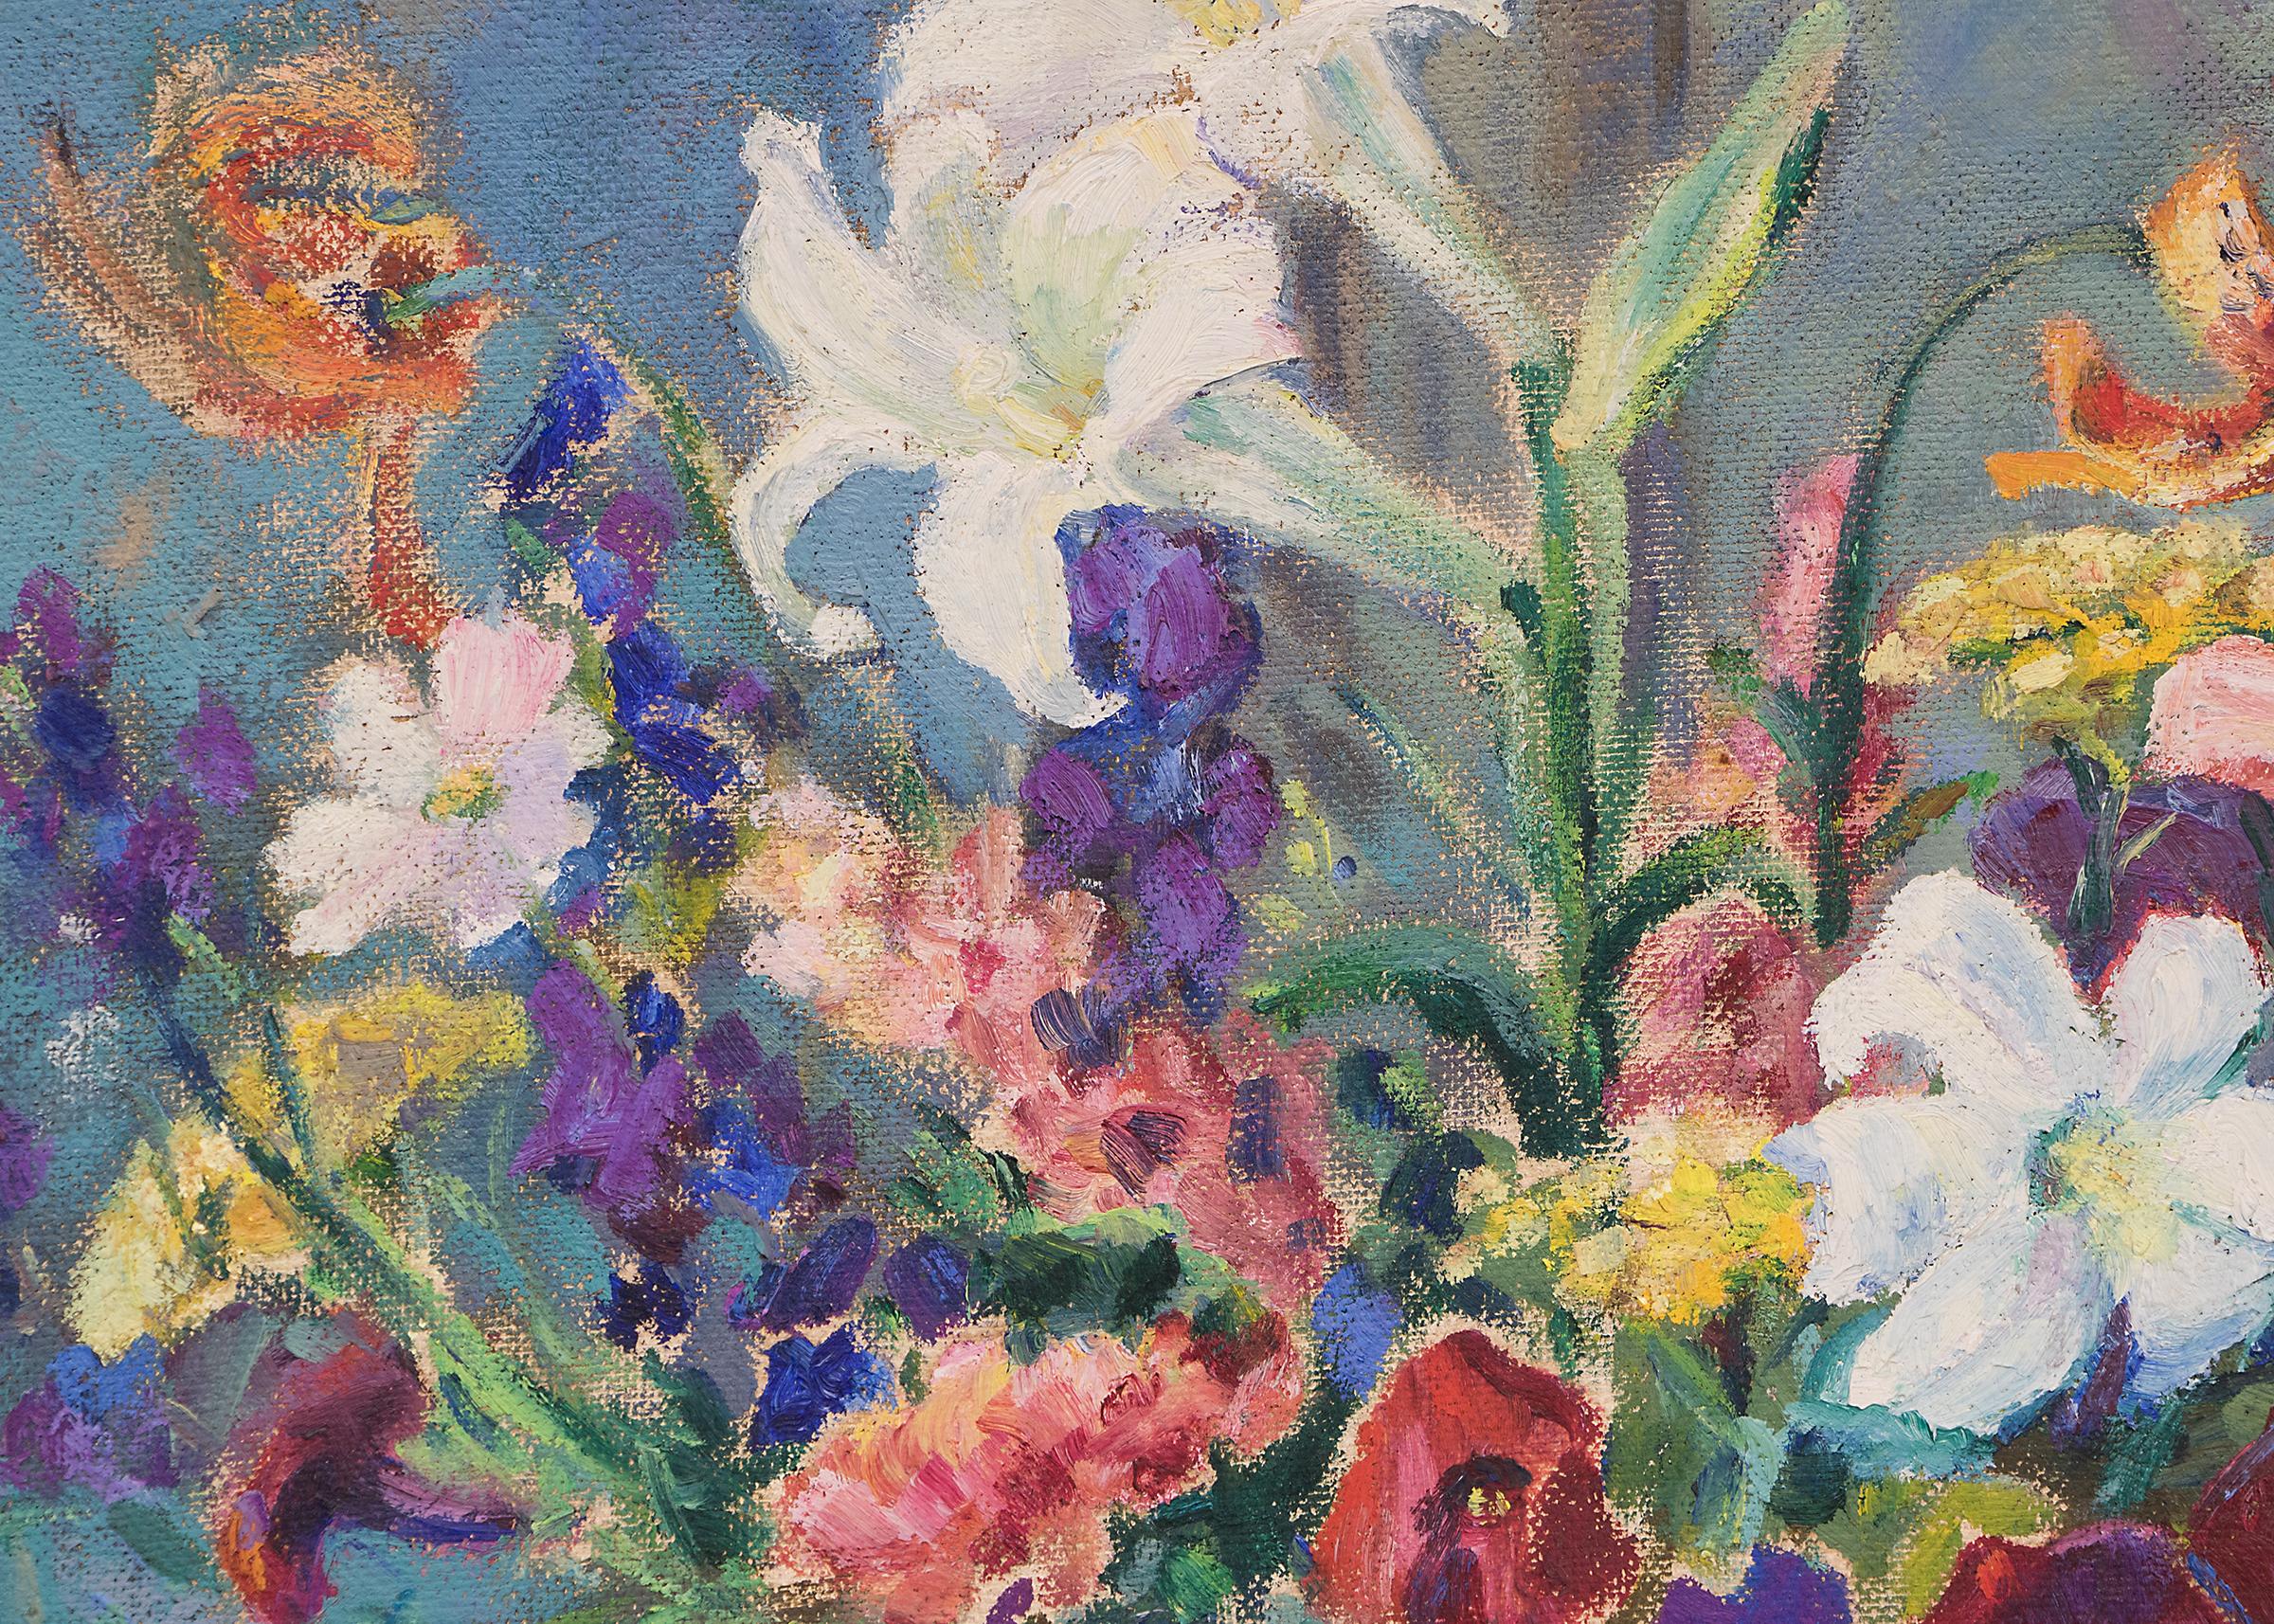 Original signed vintage 1935 still life oil painting by early Denver, Colorado woman artist, Elisabeth Spalding (1868-1954).  This still life interior scene depicts a vase of flowers in white, yellow, red, purple, yellow and orange against a blue